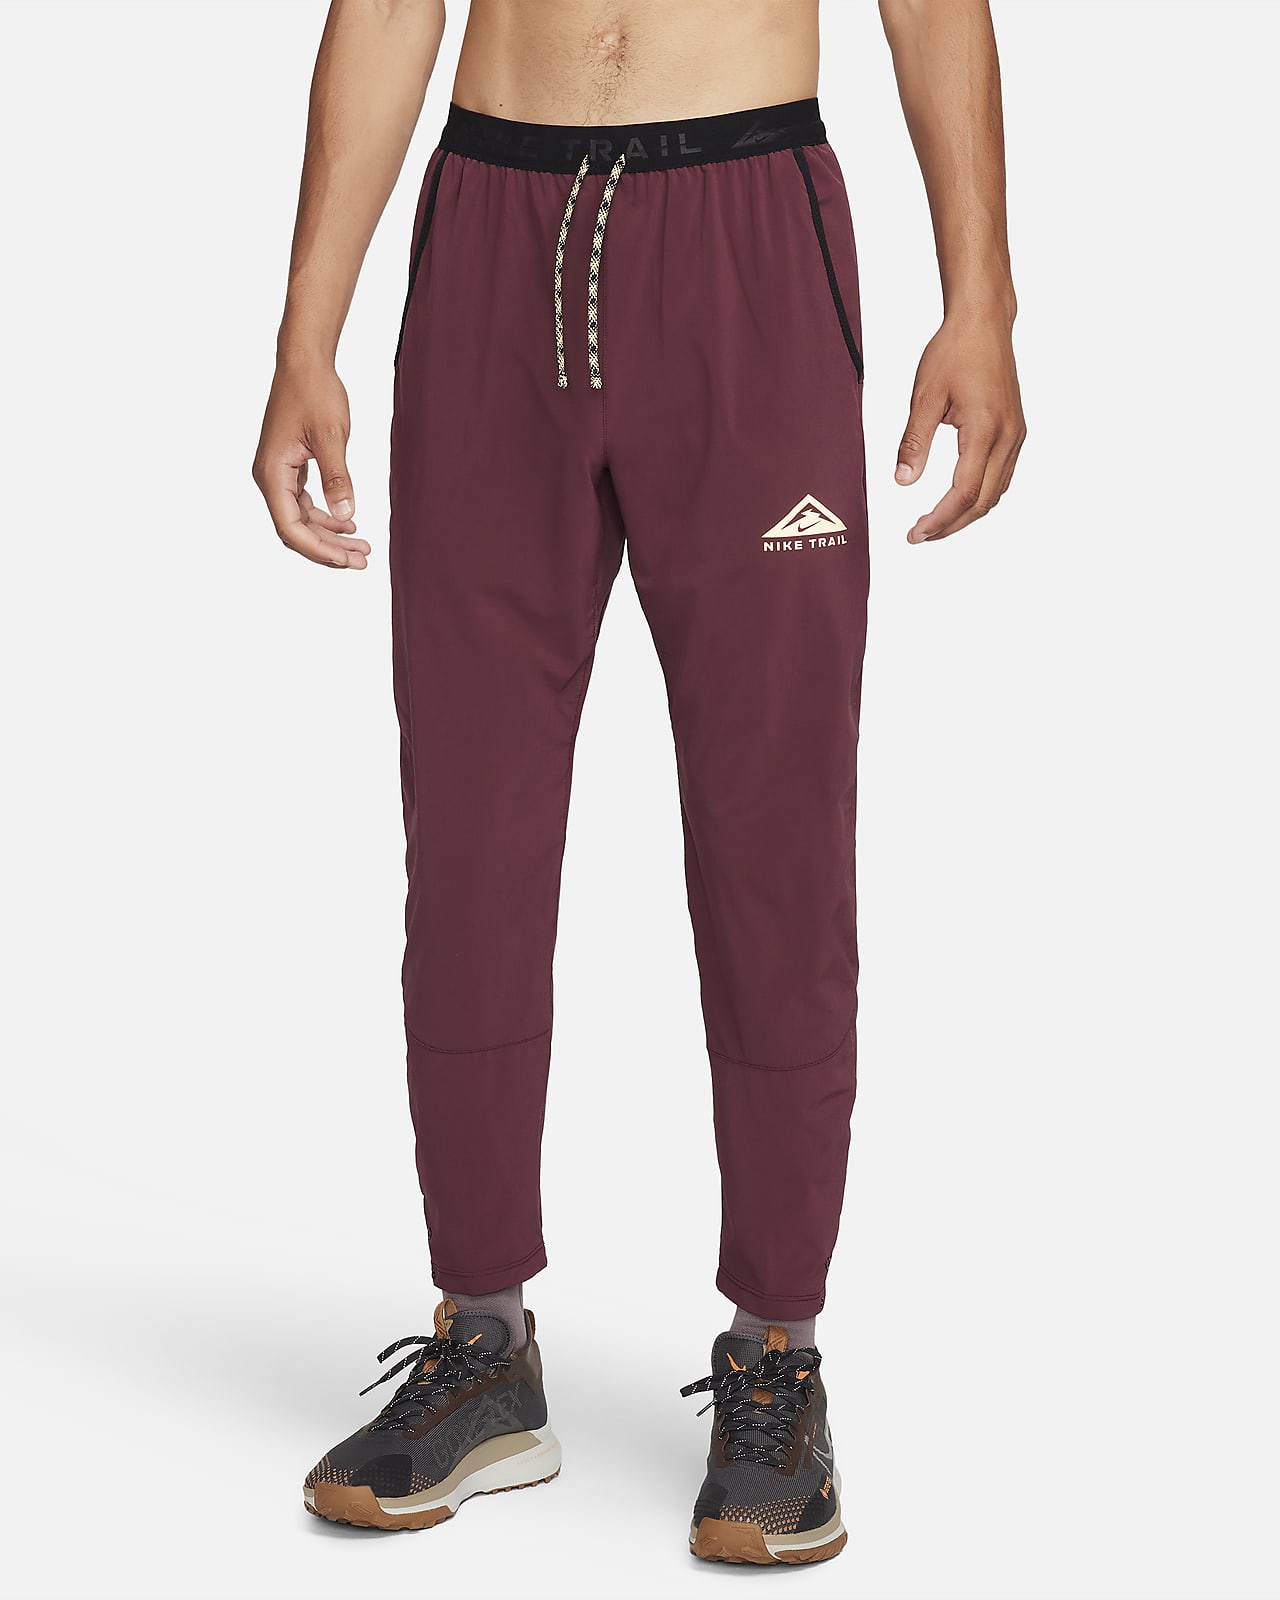 Nike Road To Wellness ribbed jersey wide leg pants in burgundy